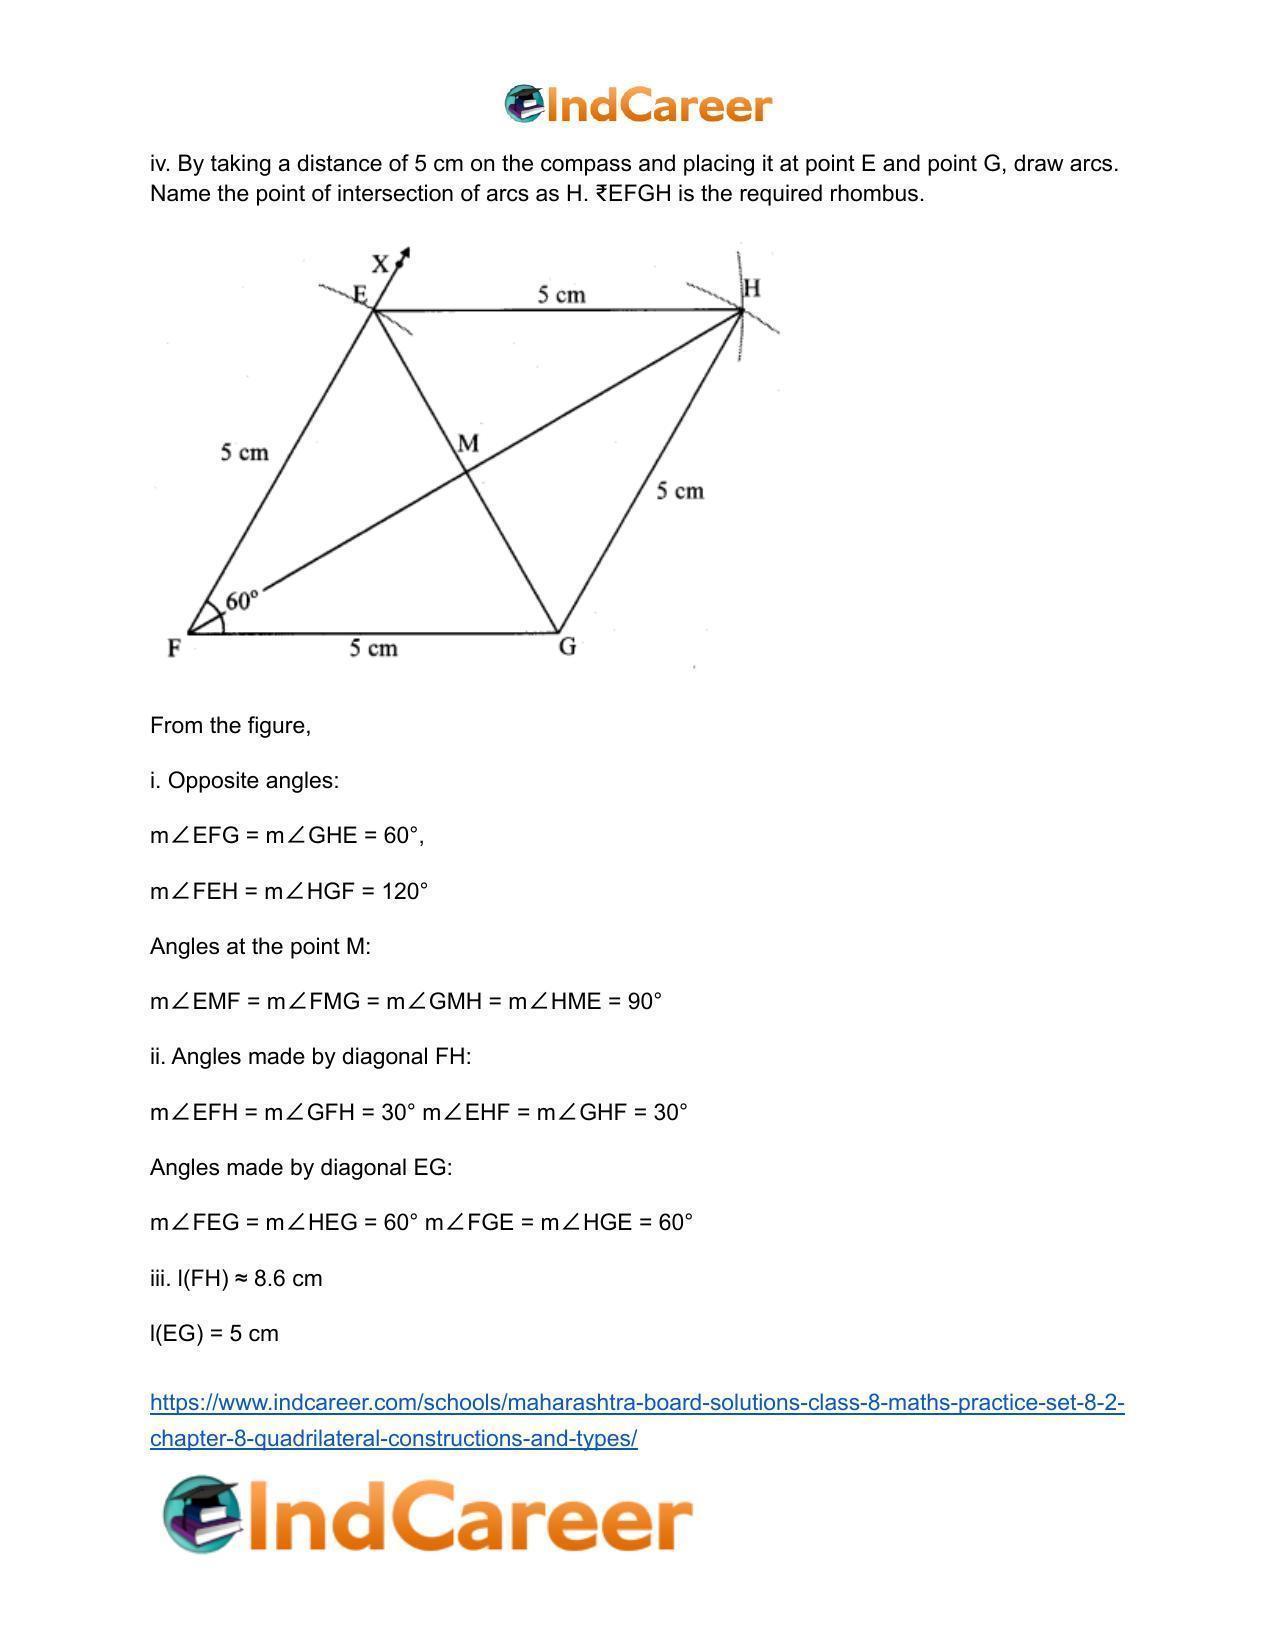 Maharashtra Board Solutions Class 8-Maths (Practice Set 8.2): Chapter 8- Quadrilateral: Constructions and Types - Page 16